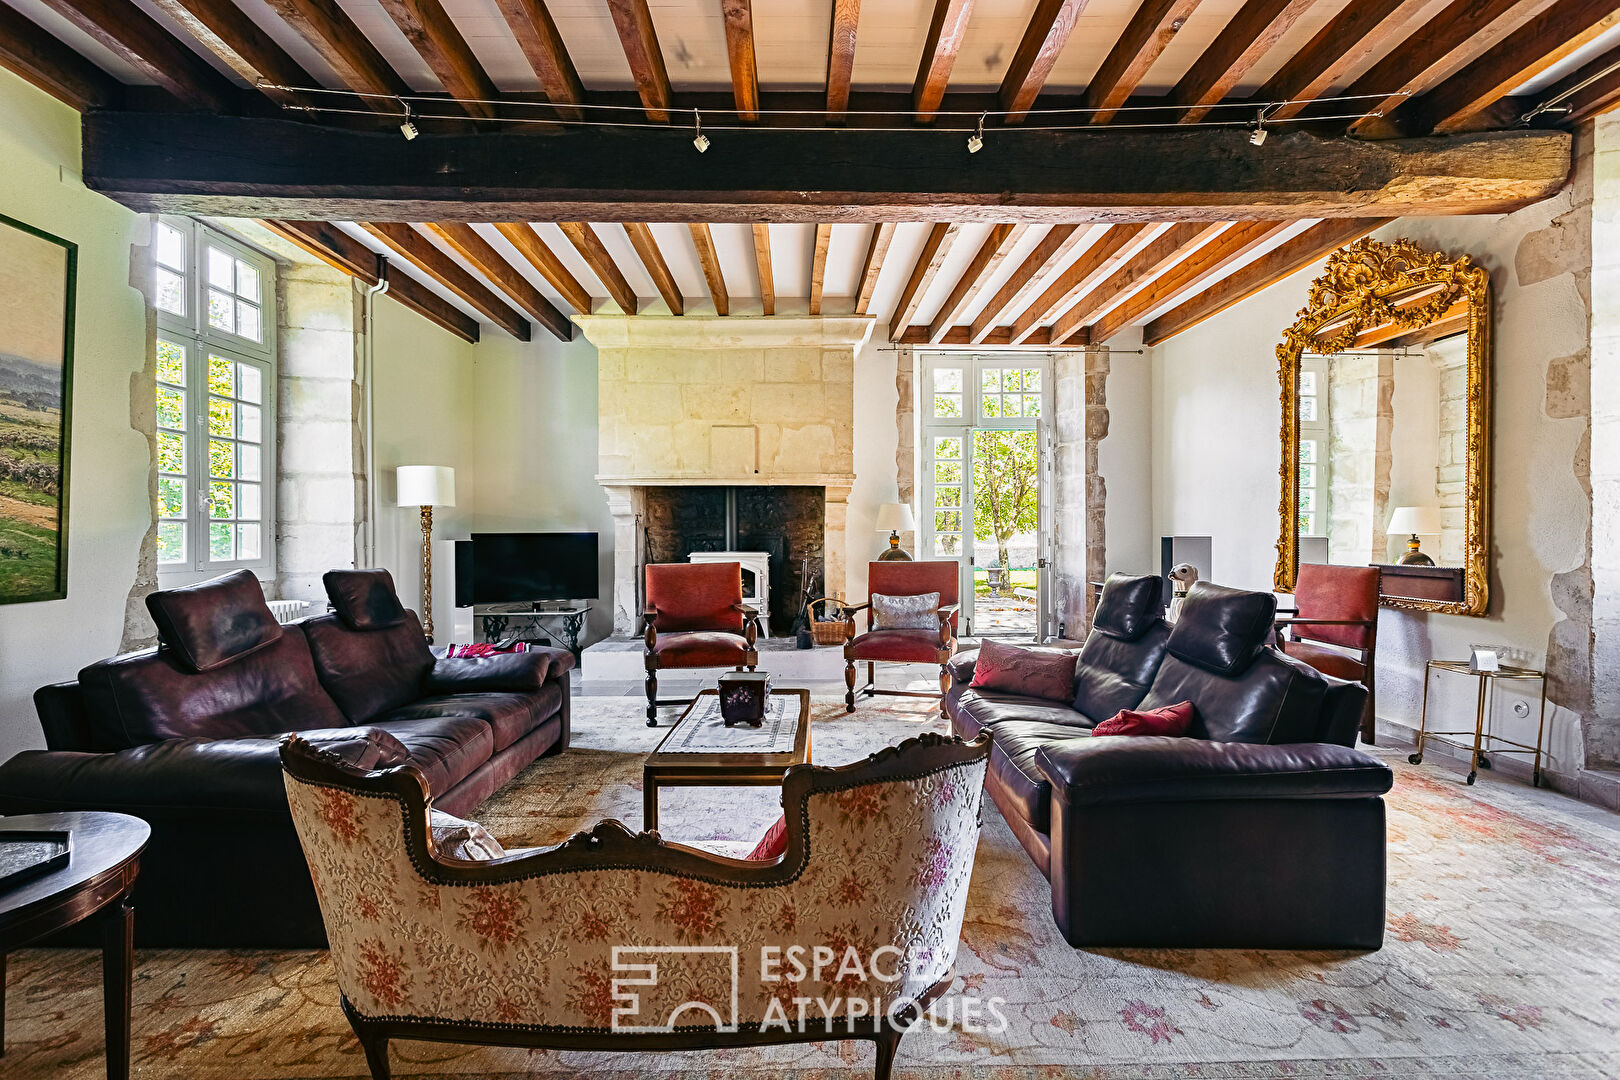 Magnificent 16th century home in a bucolic setting on the banks of the Sèvre